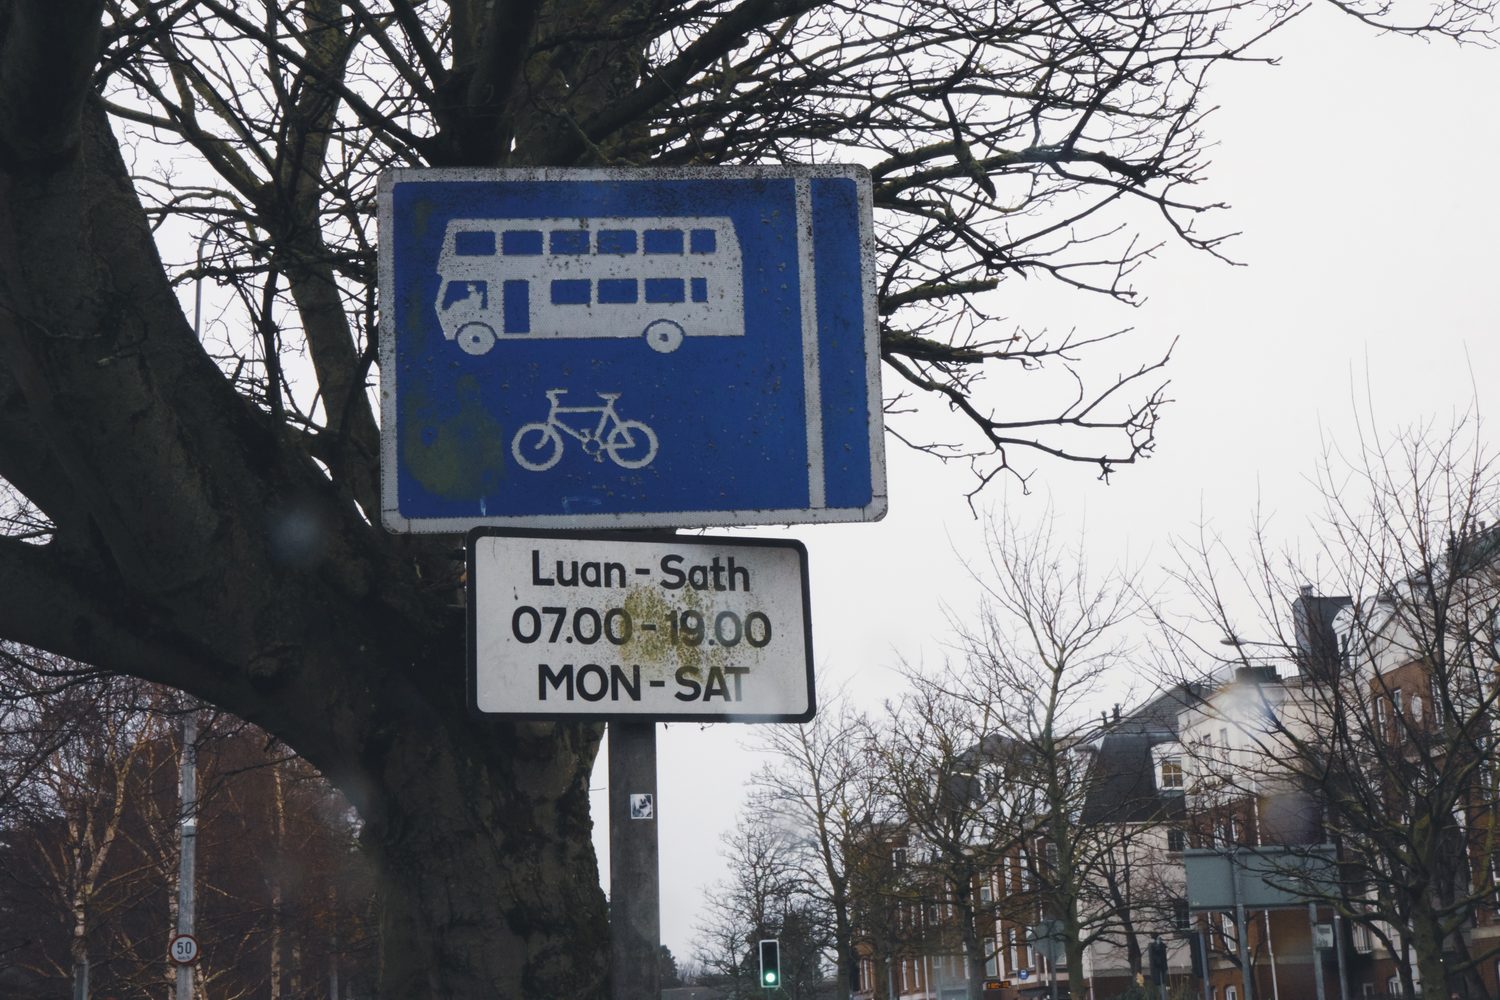 Can you ever drive in a bus lane in Ireland?